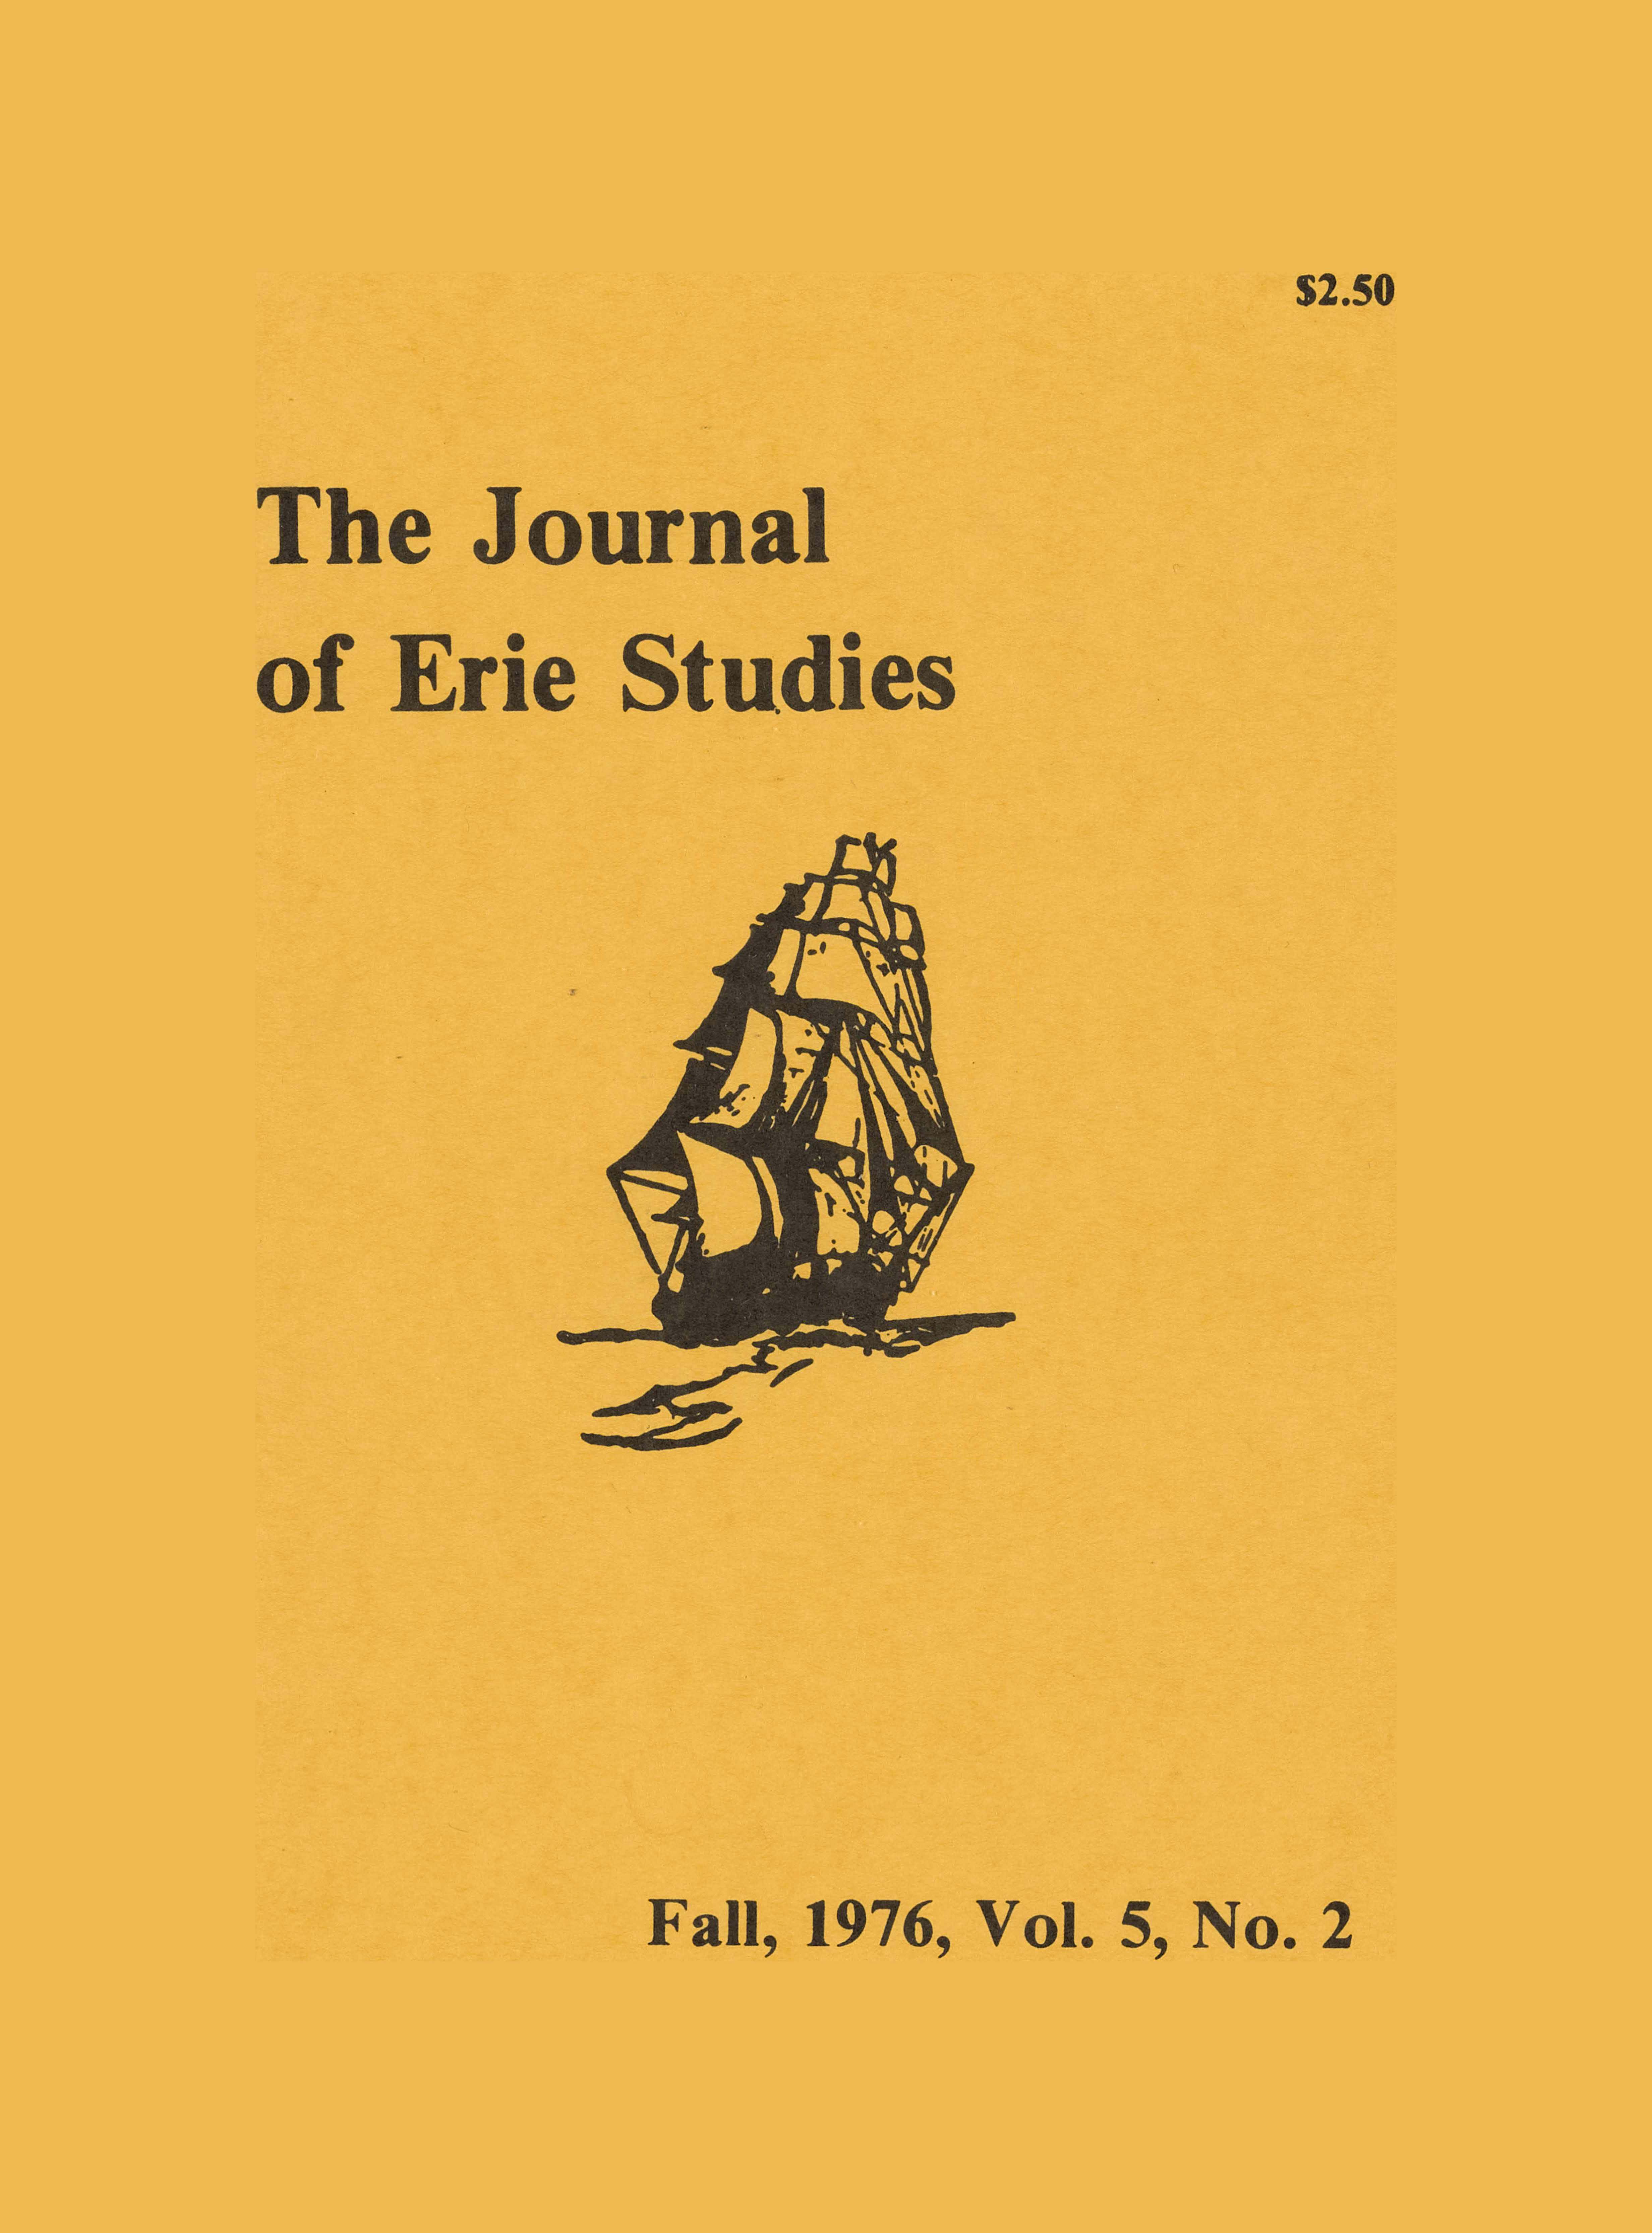 Cover of the fall 1976 issue of The Journal of Erie Studies.